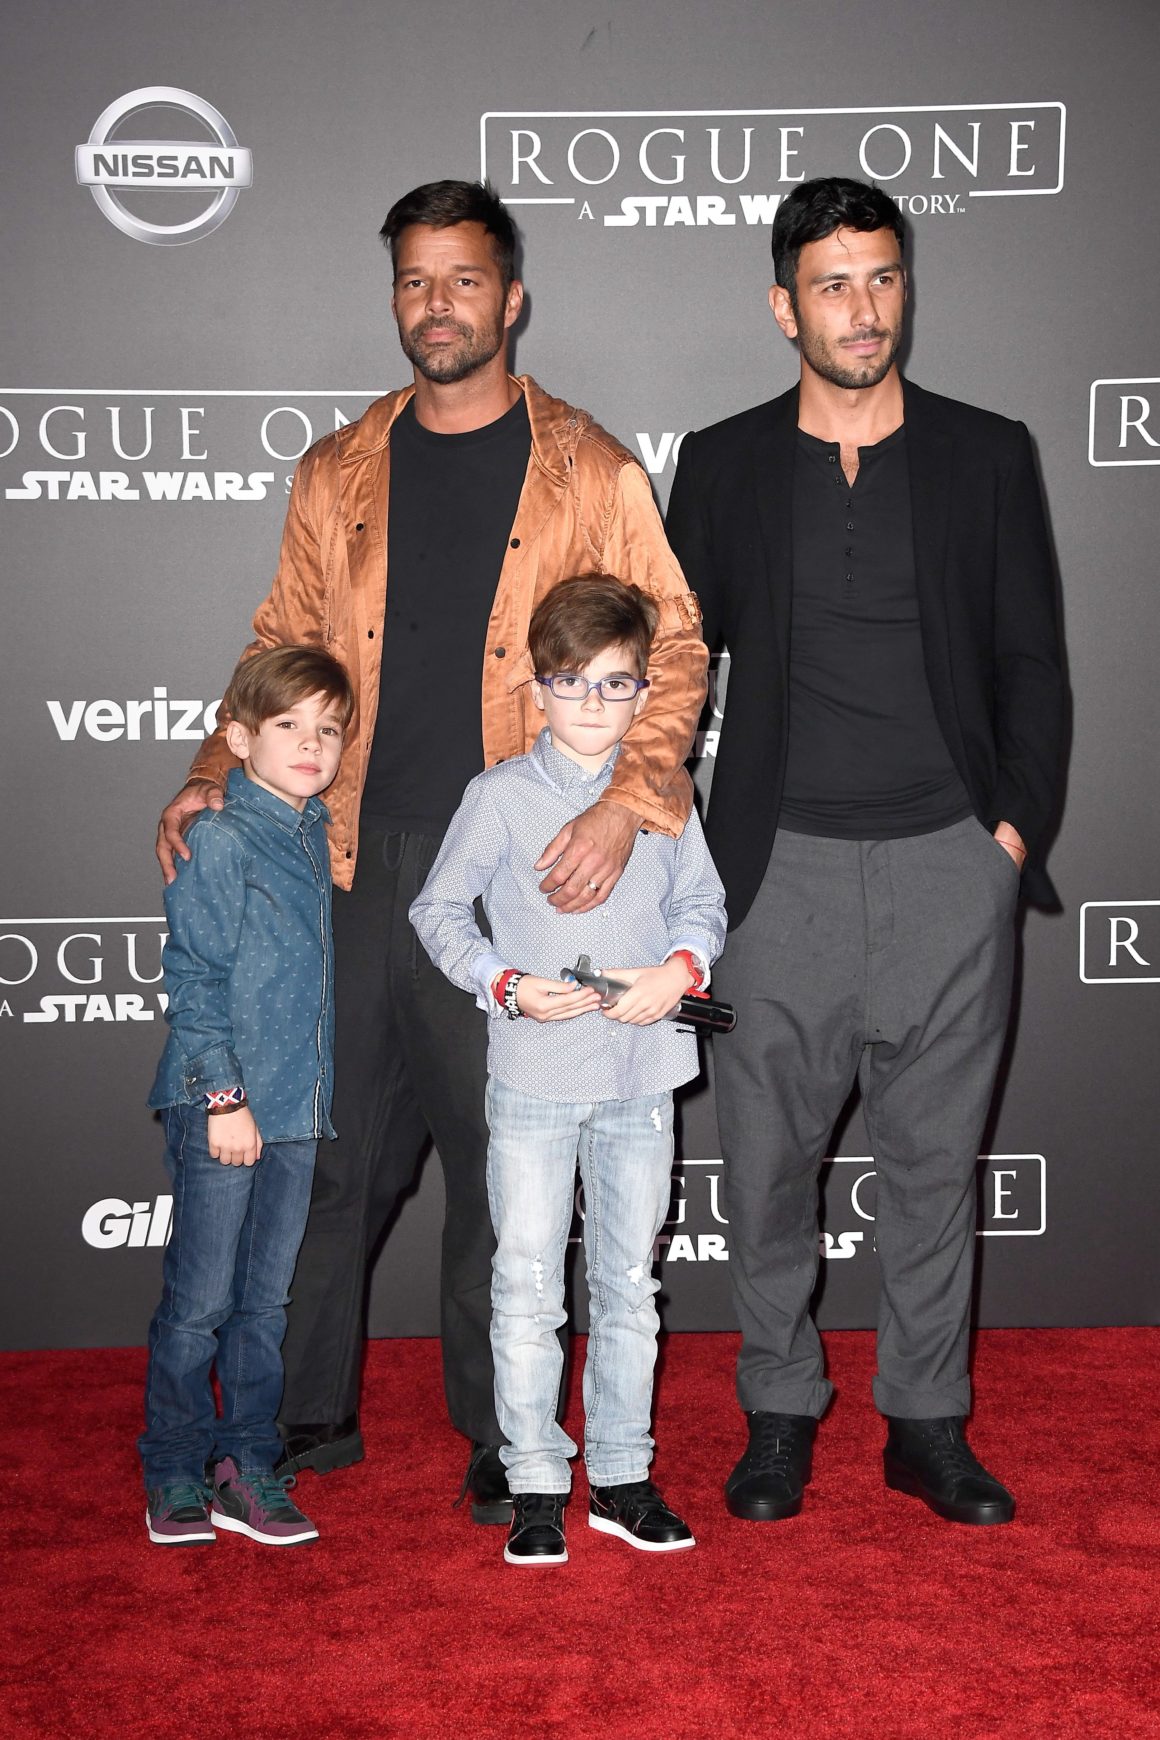 Premiere Of Walt Disney Pictures And Lucasfilm's "Rogue One: A Star Wars Story" - Arrivals